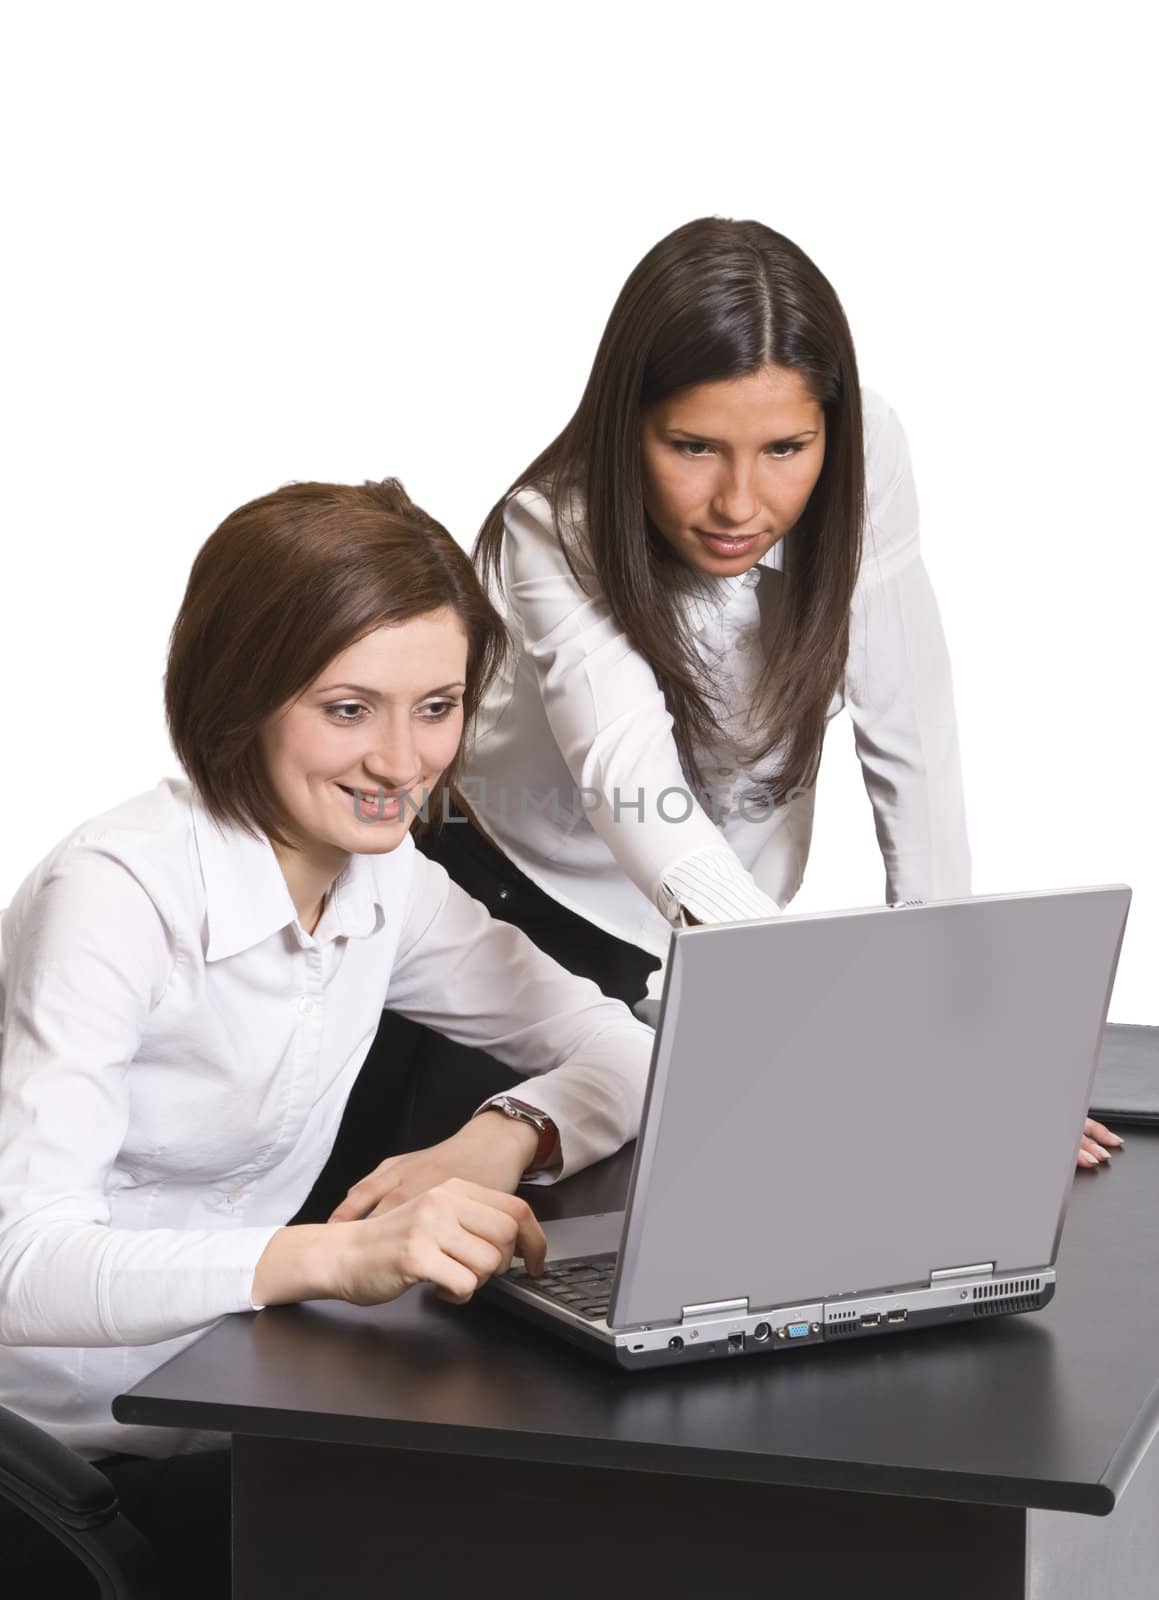 Two young businesswoman working together on a laptop at their office desk.